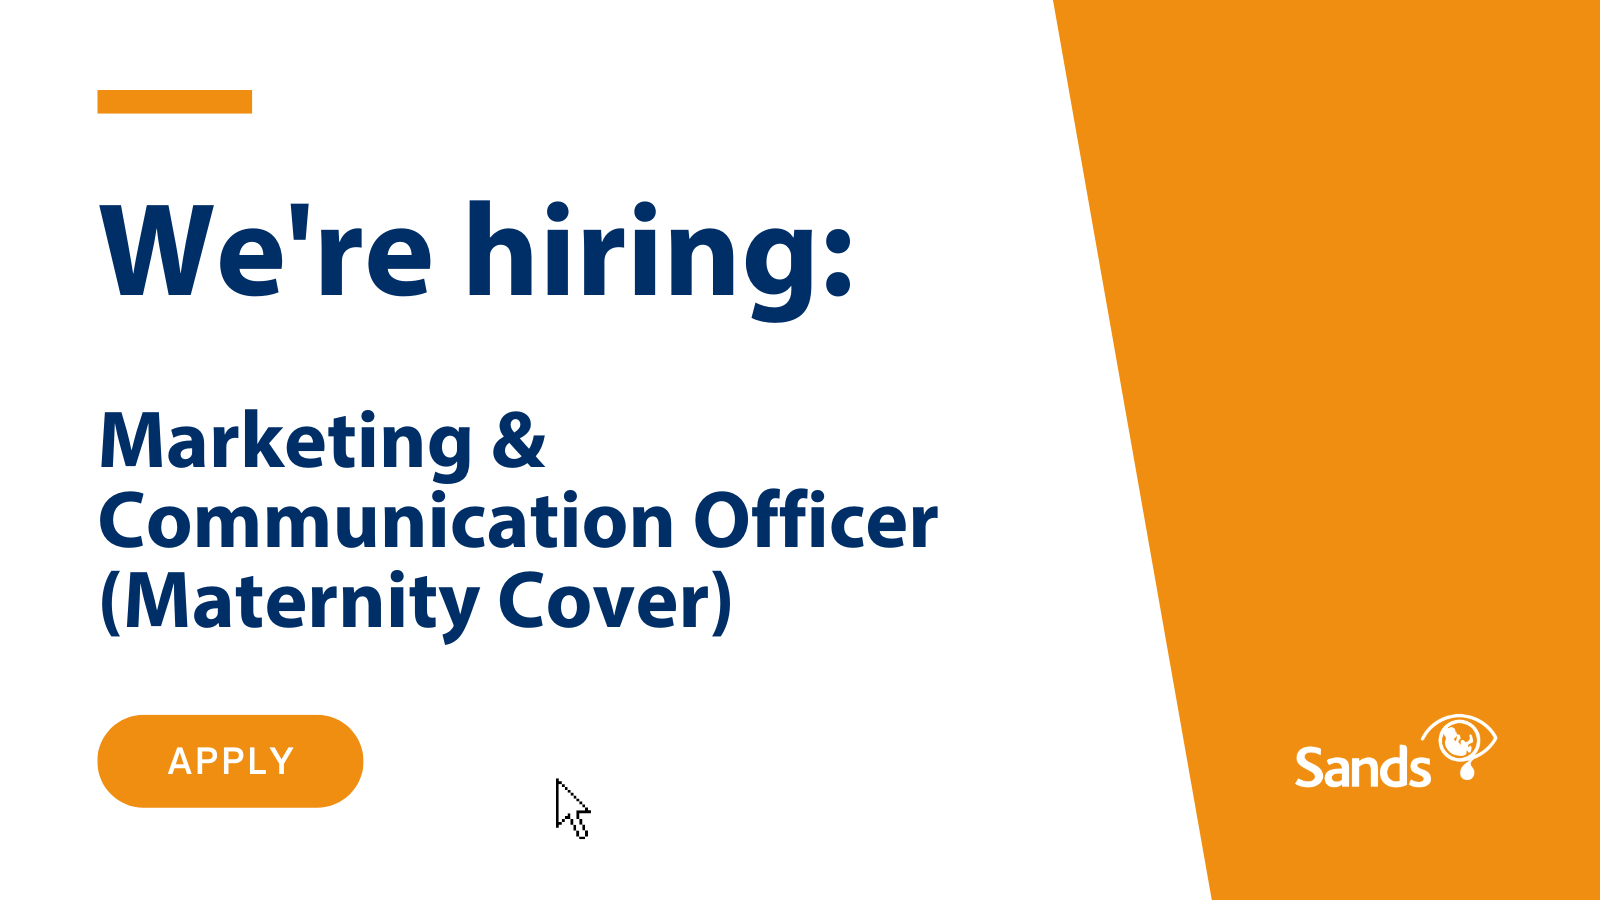 We are hiring Marketing and Communications Officer Maternity Cover